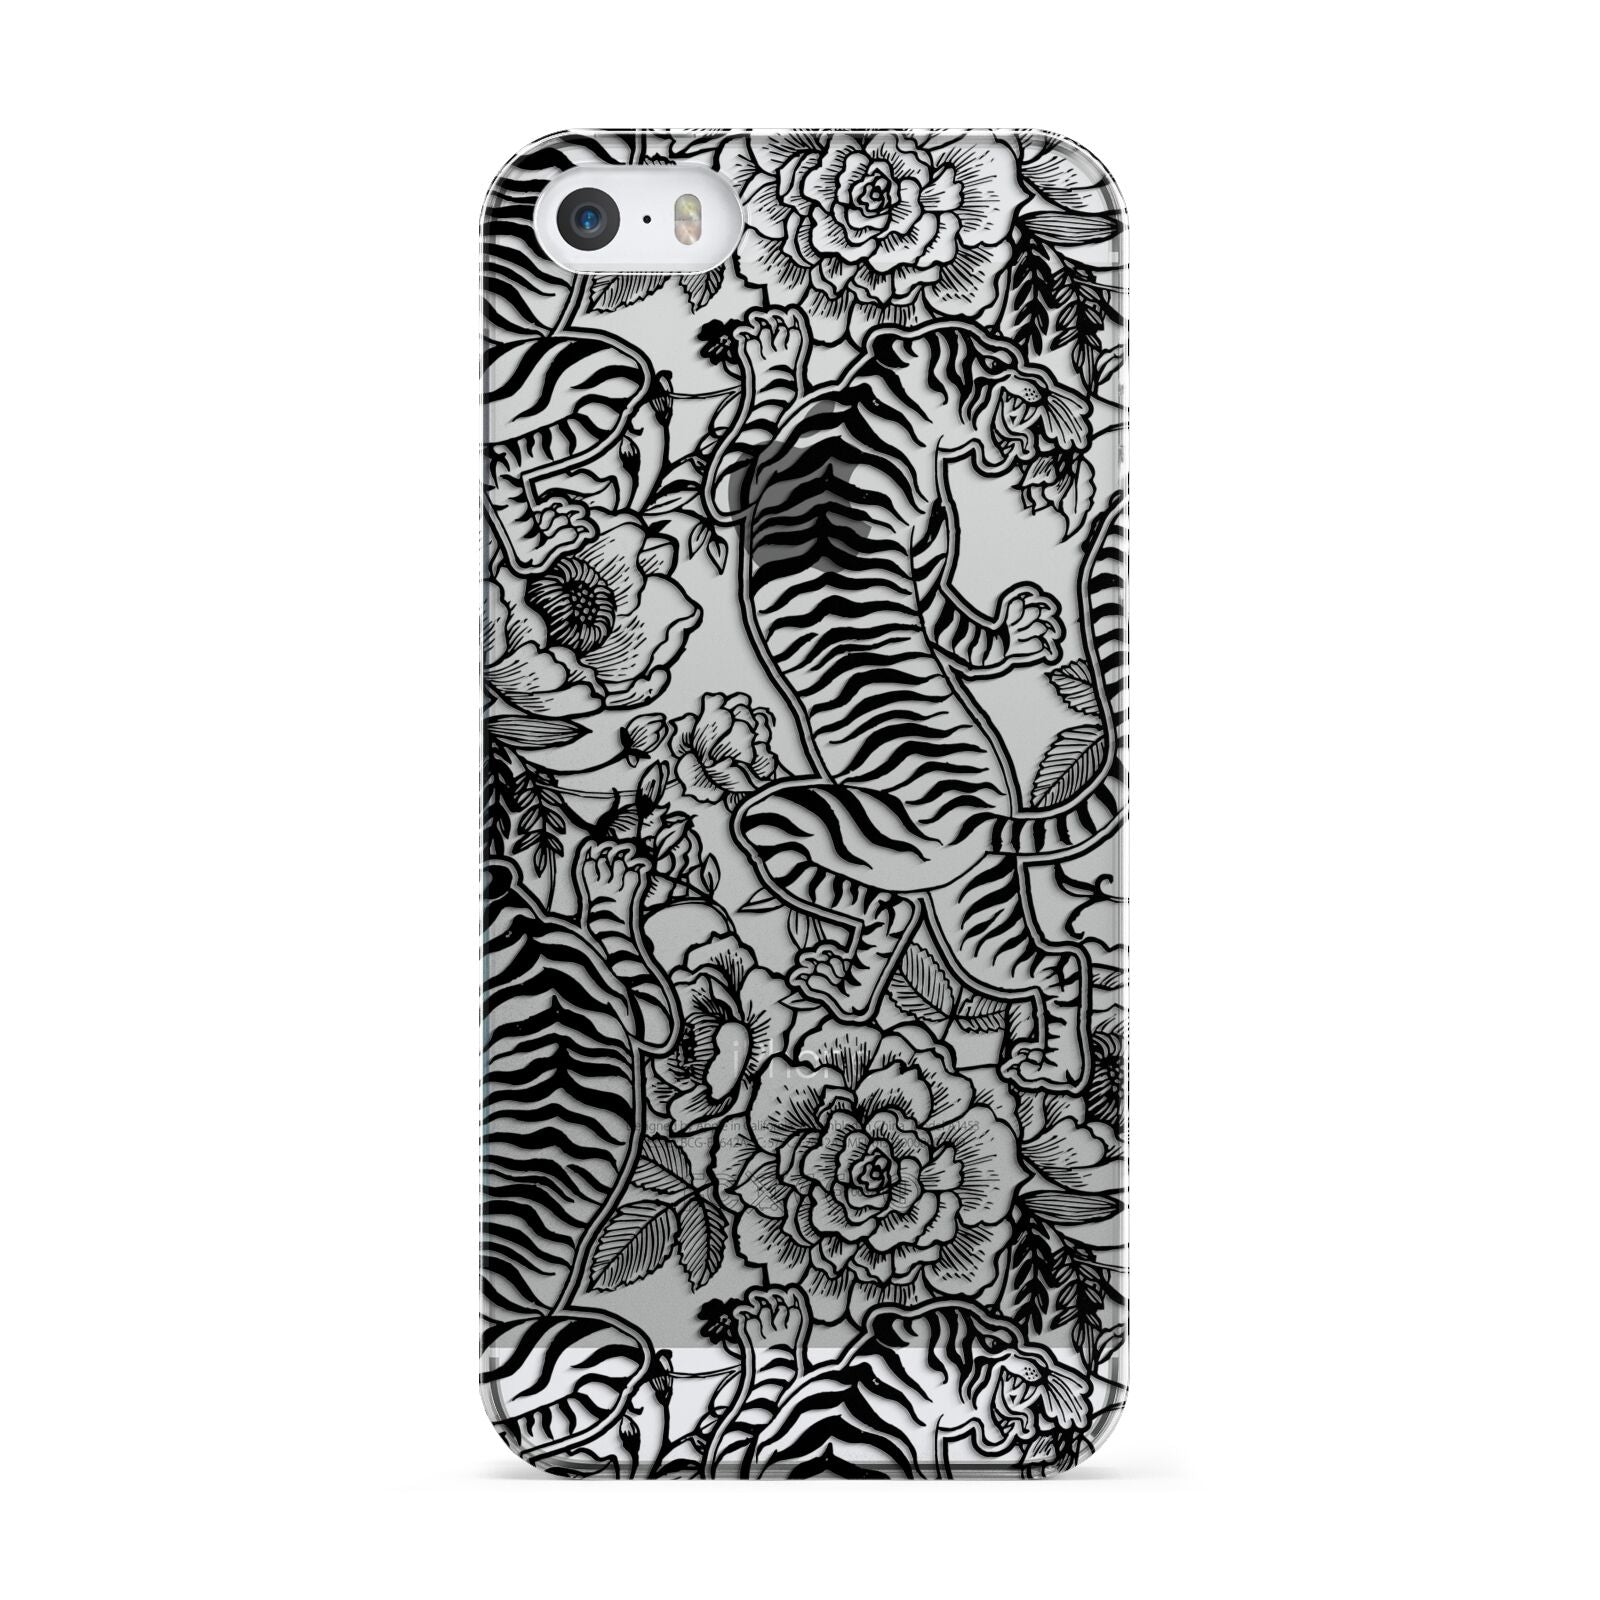 Chinese Tiger Apple iPhone 5 Case